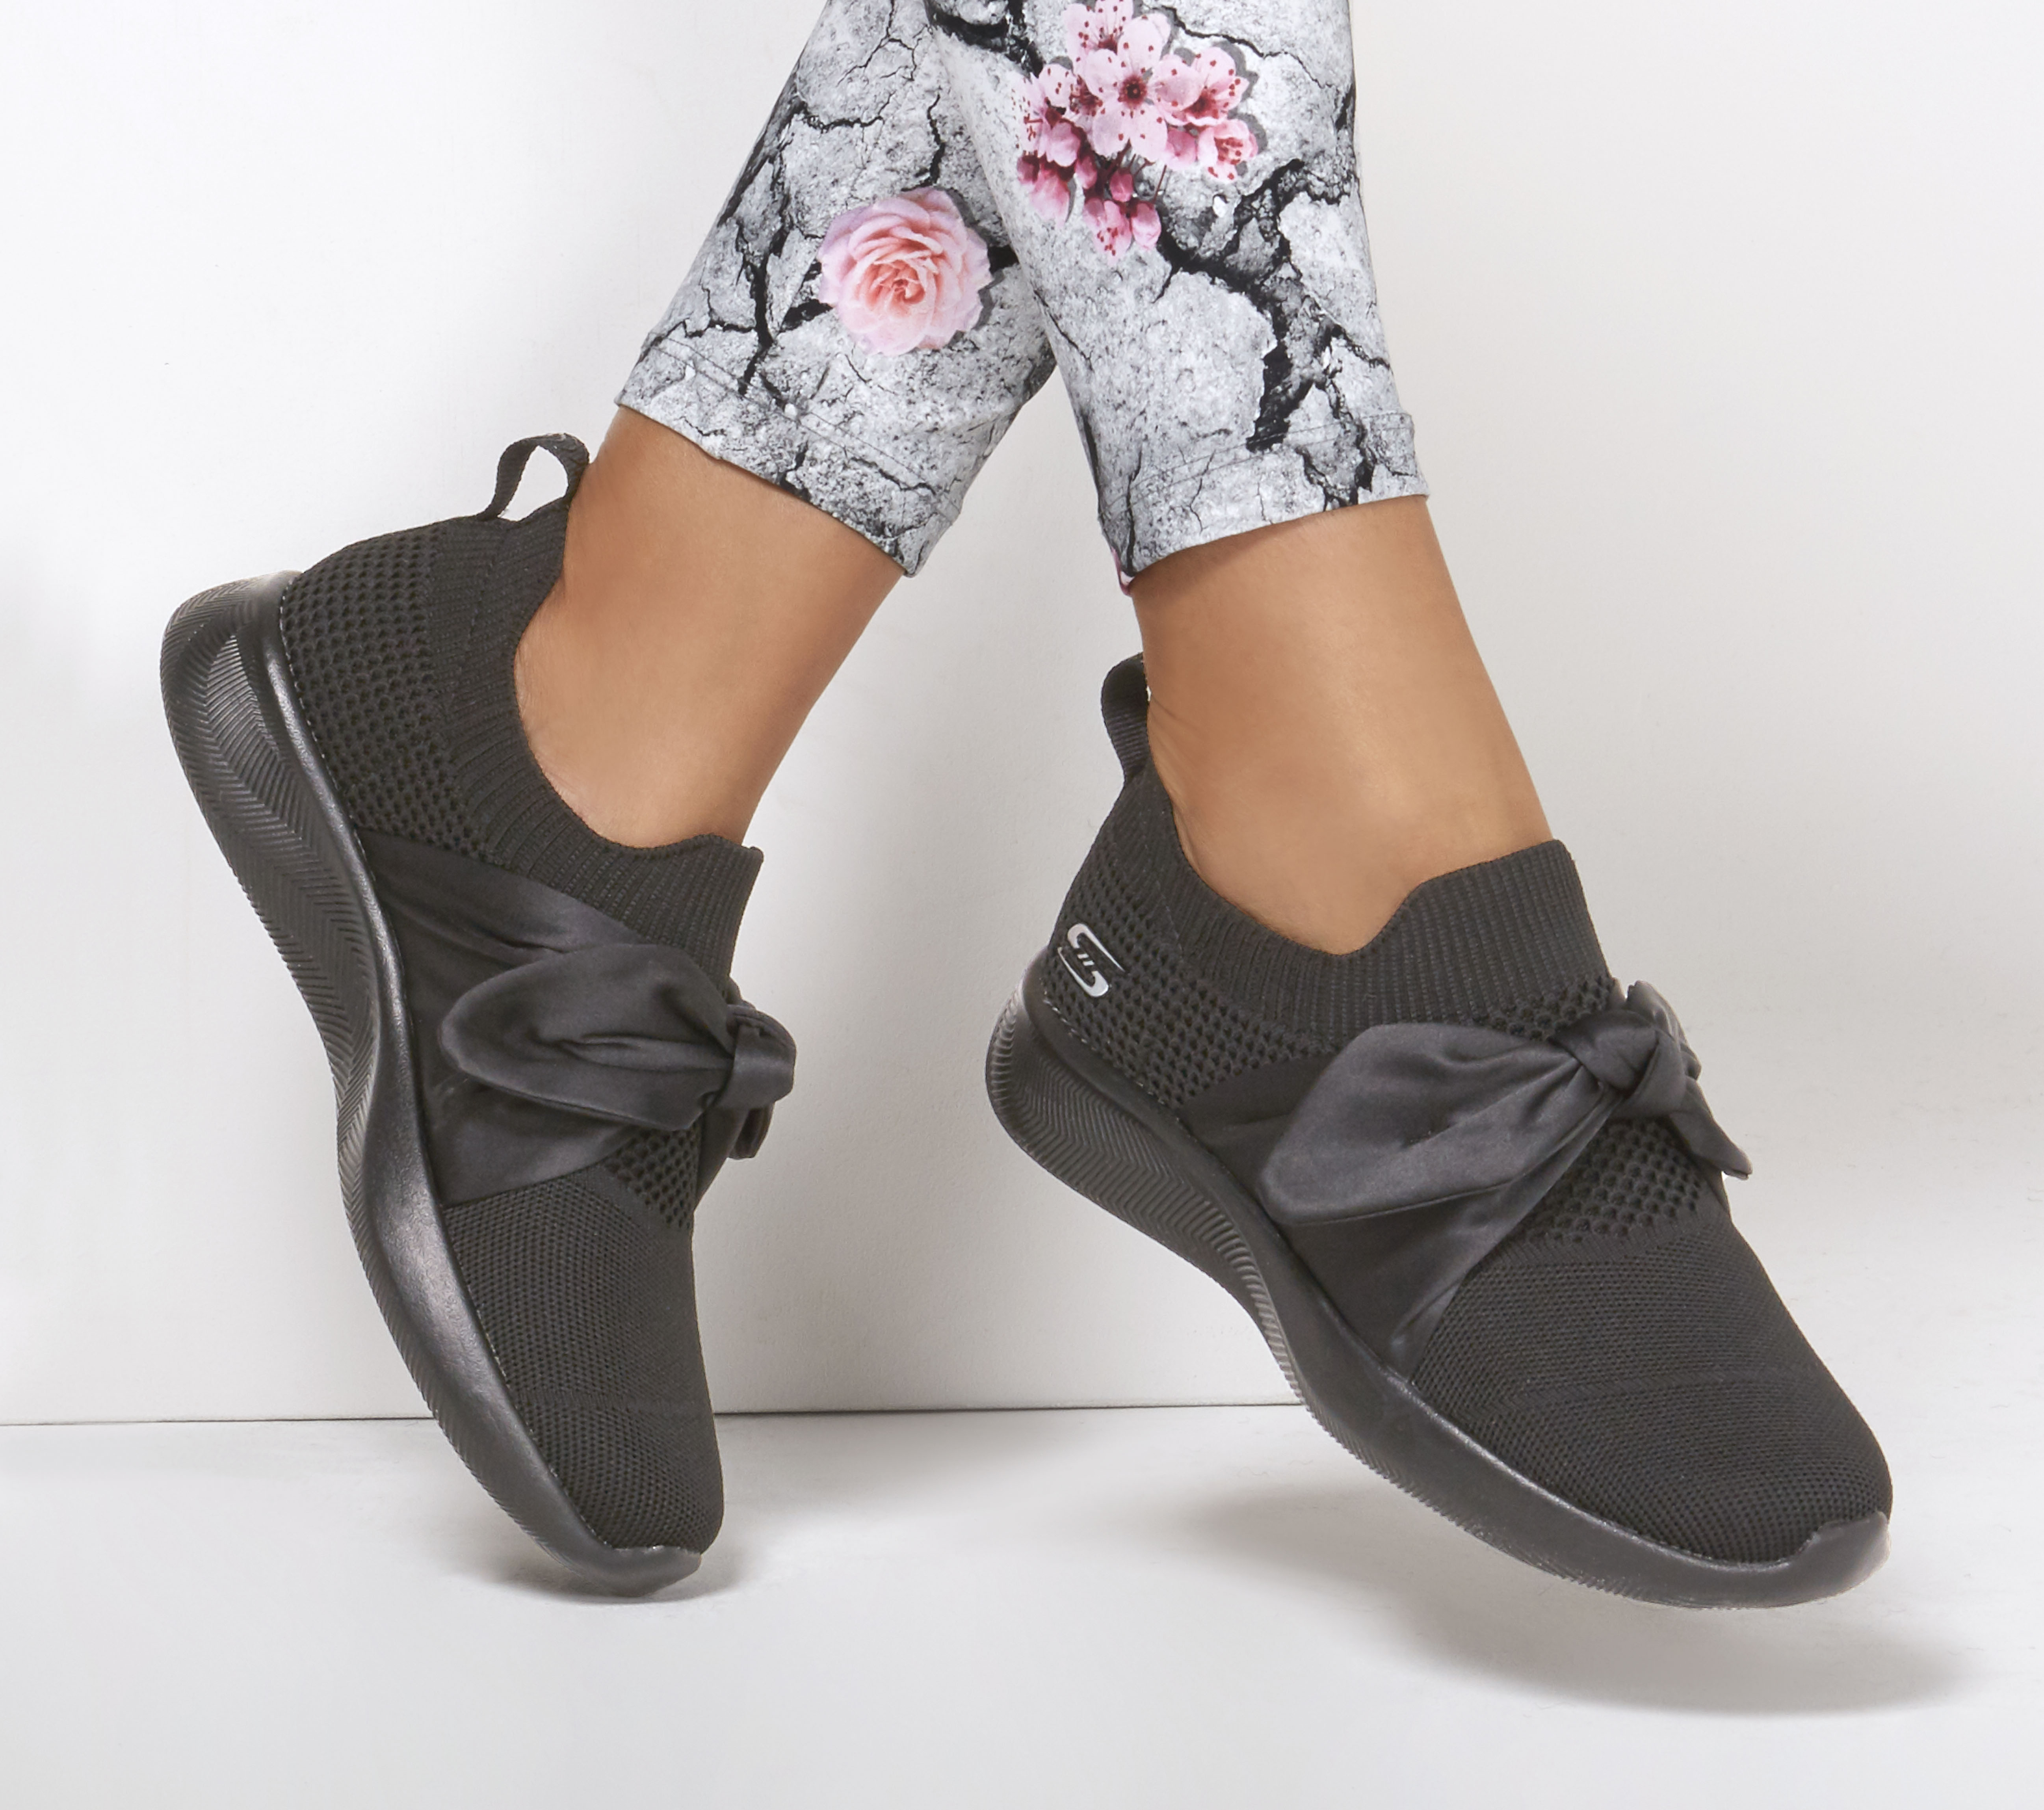 skechers slip on with bow